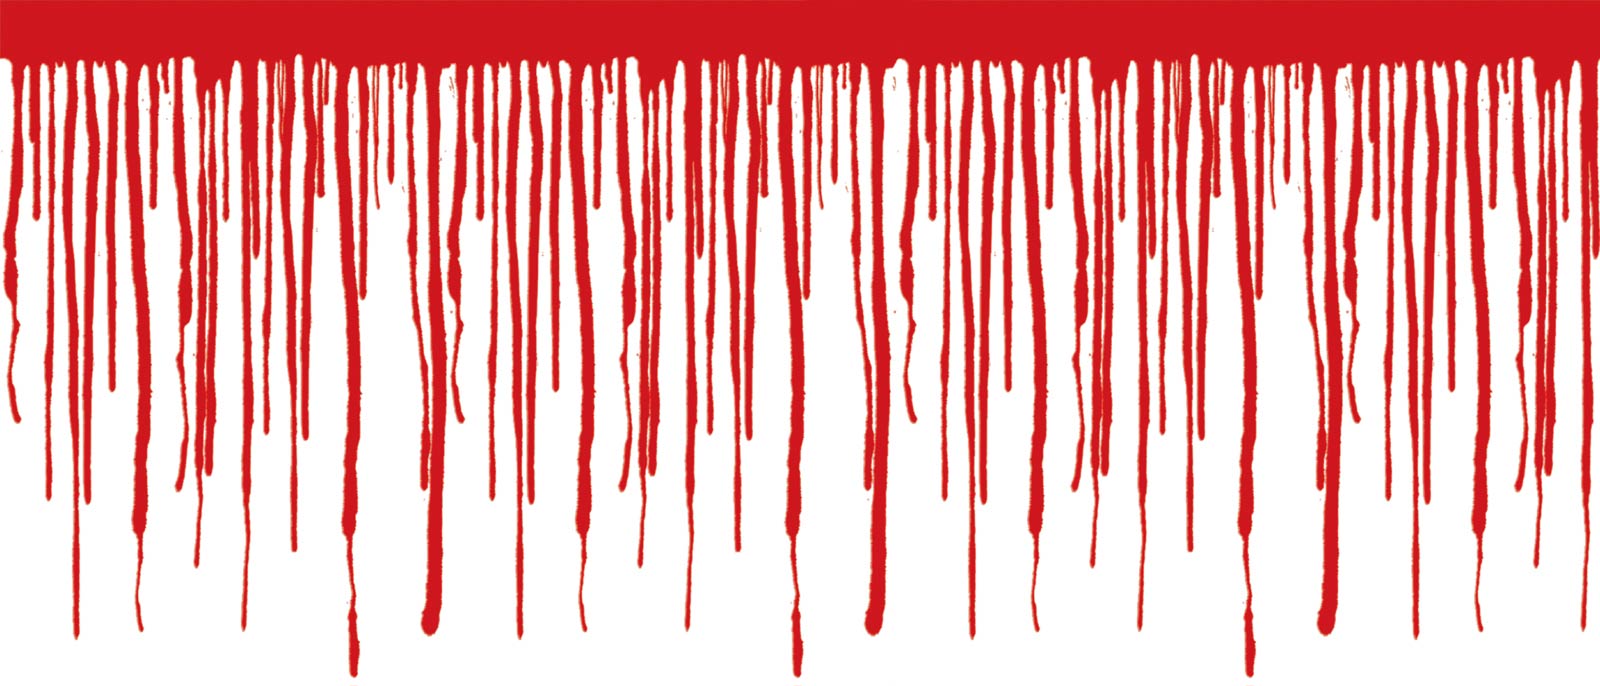 dripping blood clipart border free - photo #48